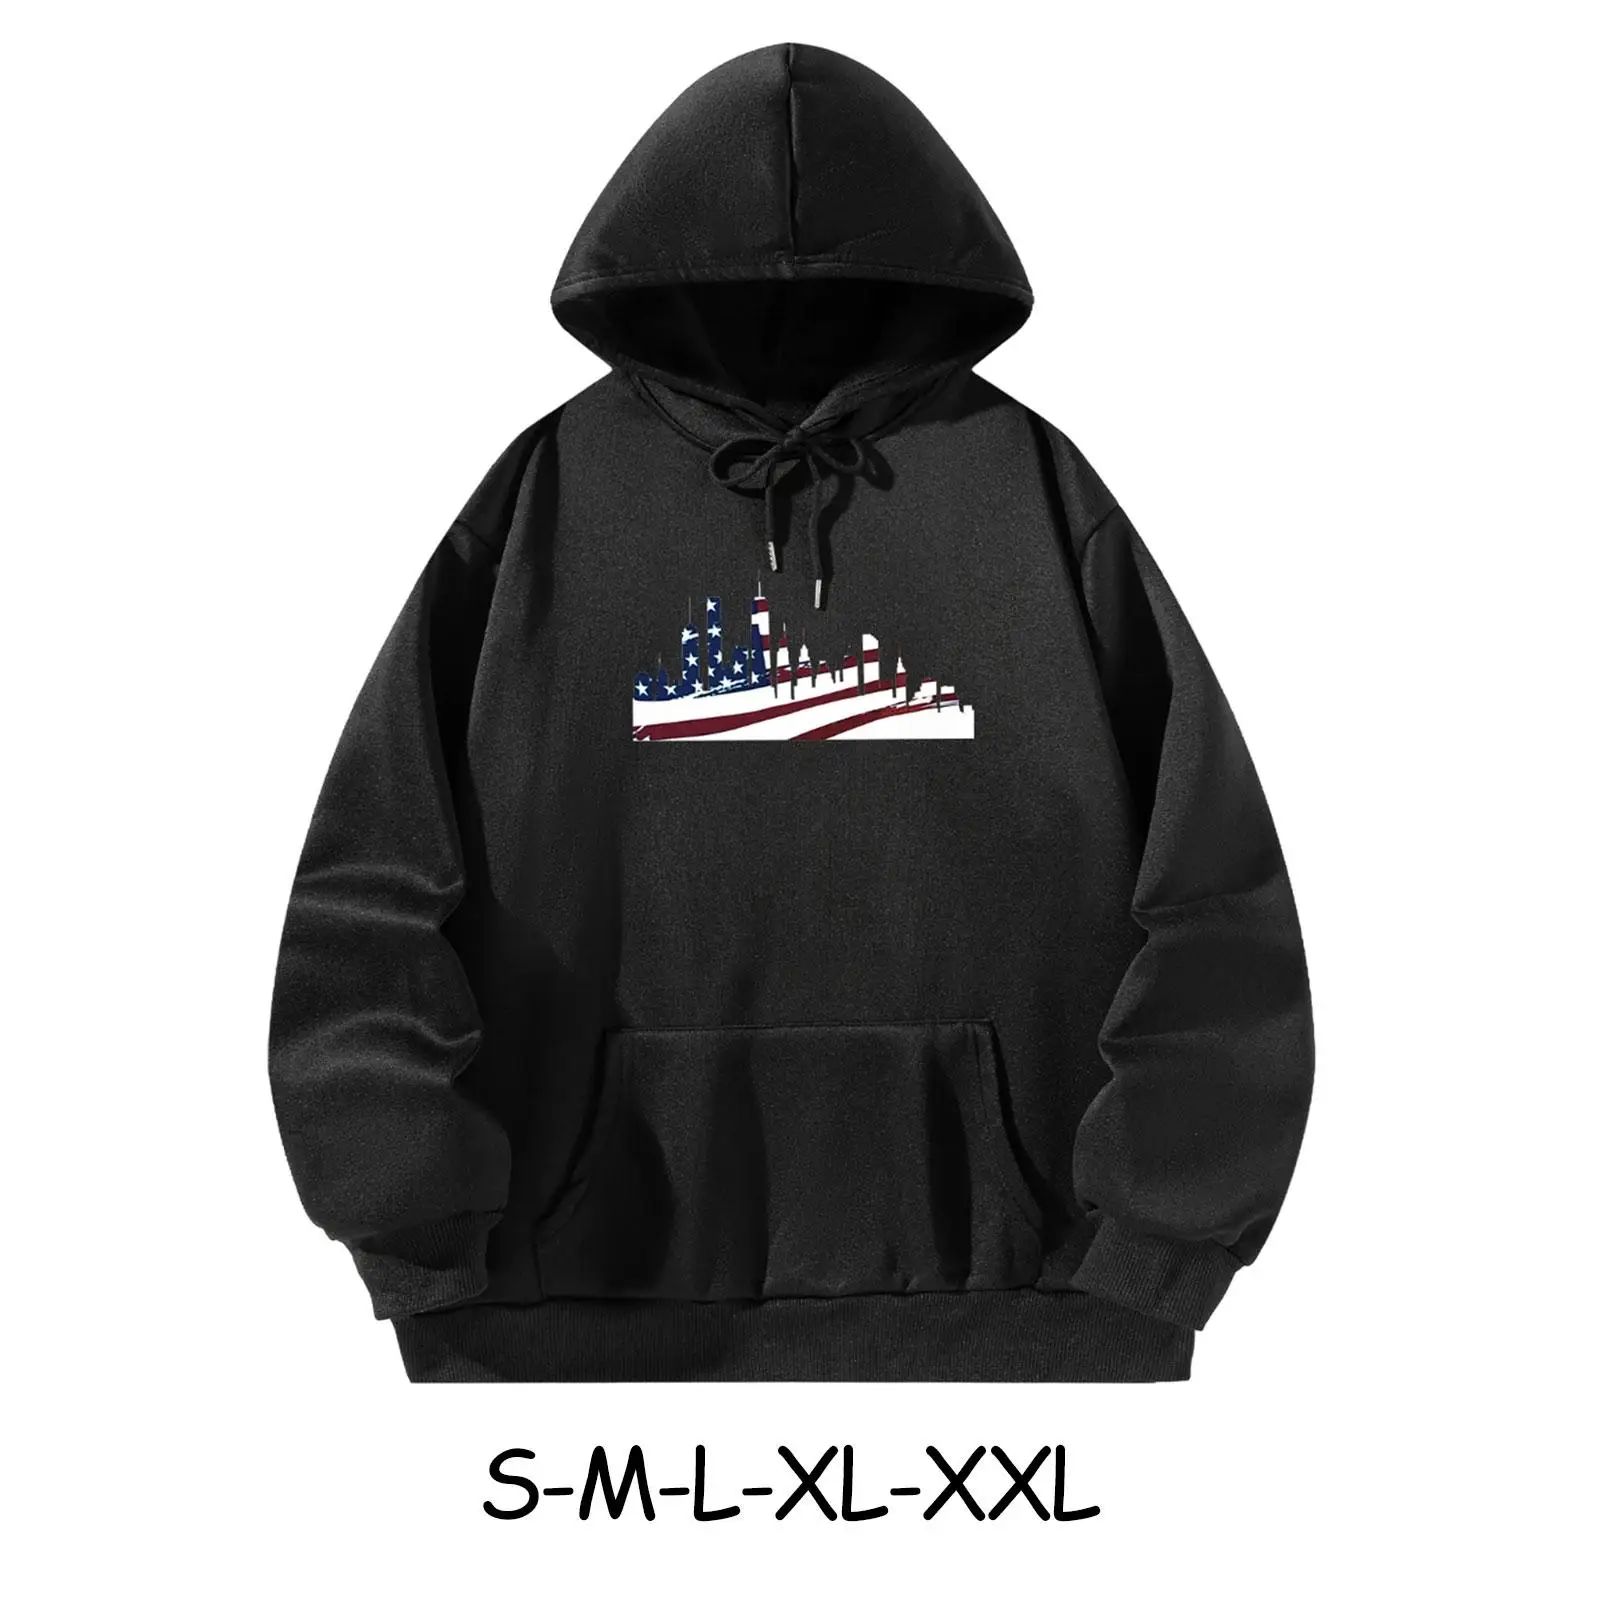 Womens Pullover Hoodie Stylish Streetwear Drawstring Hooded Sweatshirt for Shopping Indoor Outdoor Travel Street Backpacking